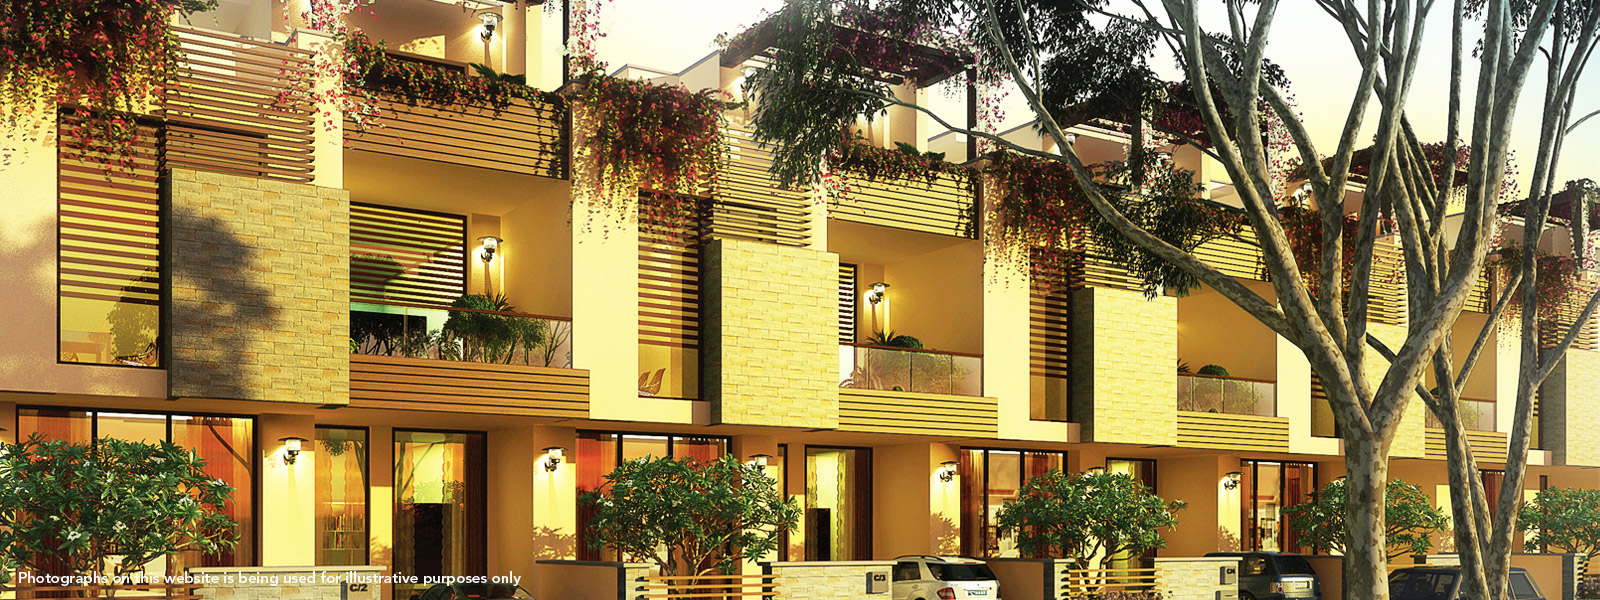 property for sale in jaipur